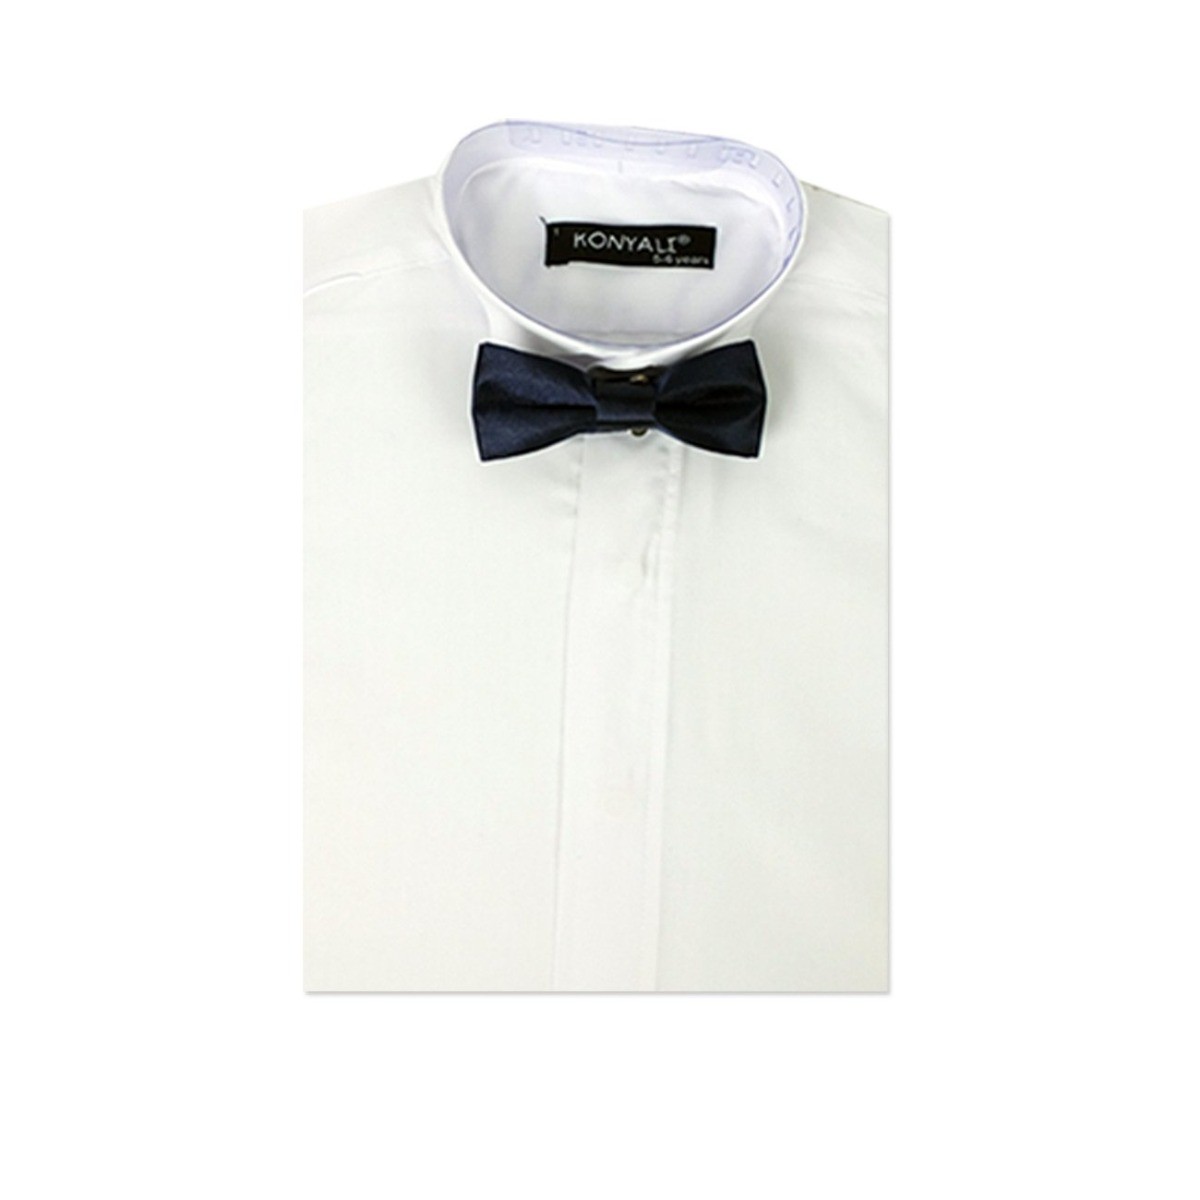 Boys Wing Collar Tuxedo Suit Shirt & Bow Tie Set - Ivory with choice of tie colour